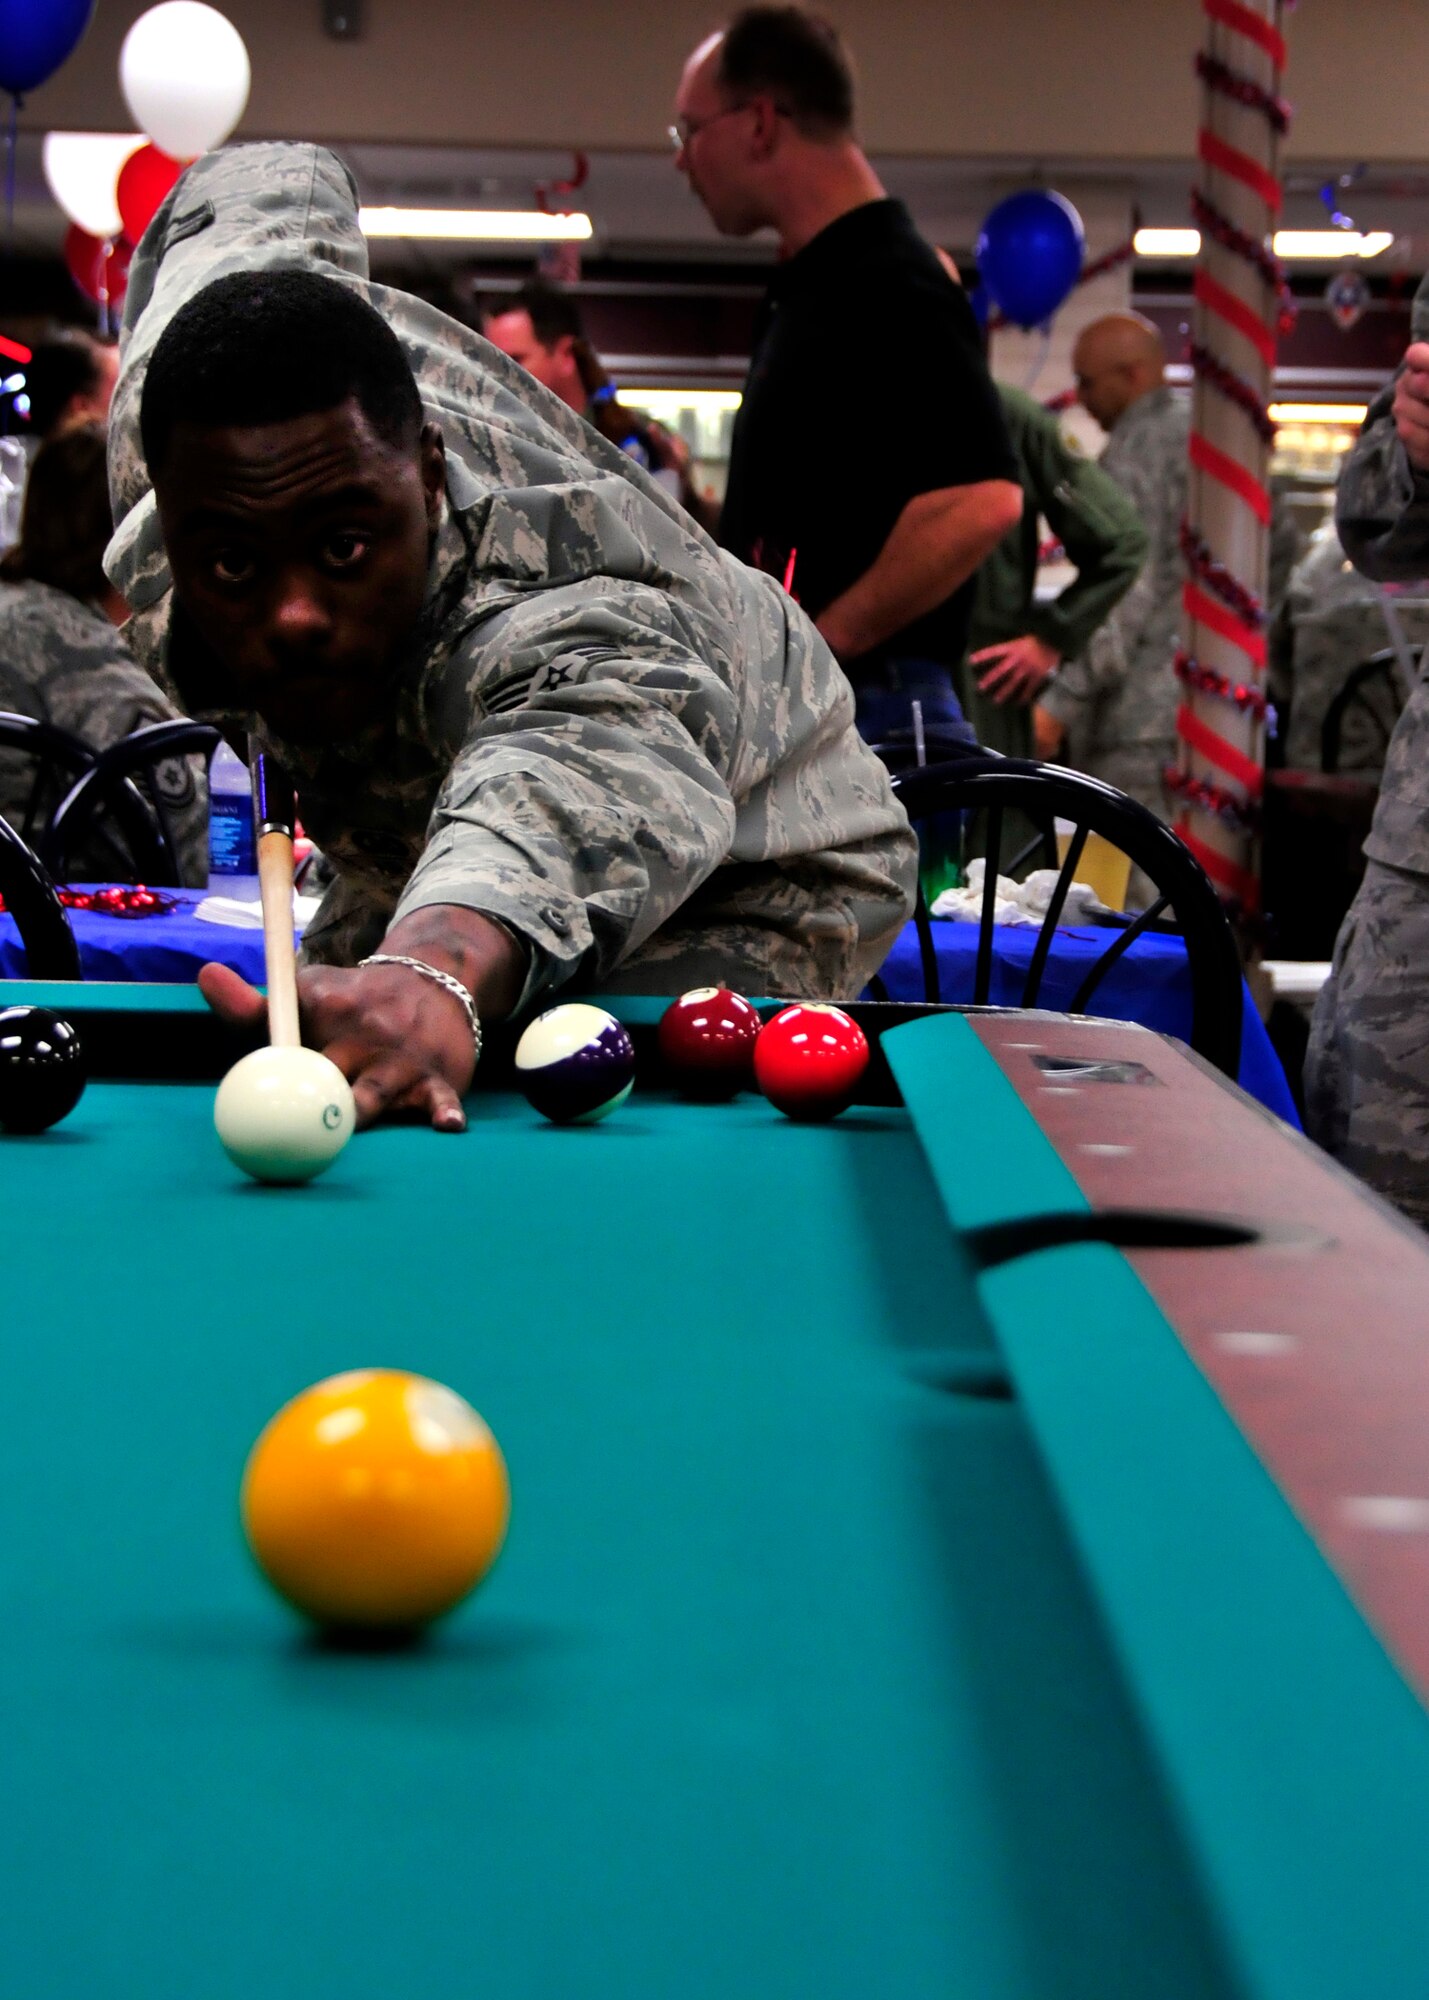 Senior Airman Jamal Anderson, 919th Operations Support Squadron, lines up a shot on the new pool table at the remodeled Outpost on Duke Field, Fla., recently. The grand opening featured free food, games and a live band to showcase the new facility.  The other new games include darts, dollar bingo, a table top quiz game and an X-Box 360 with a Kinect device. (U.S. Air Force photo/Tech. Sgt. Cheryl Foster)